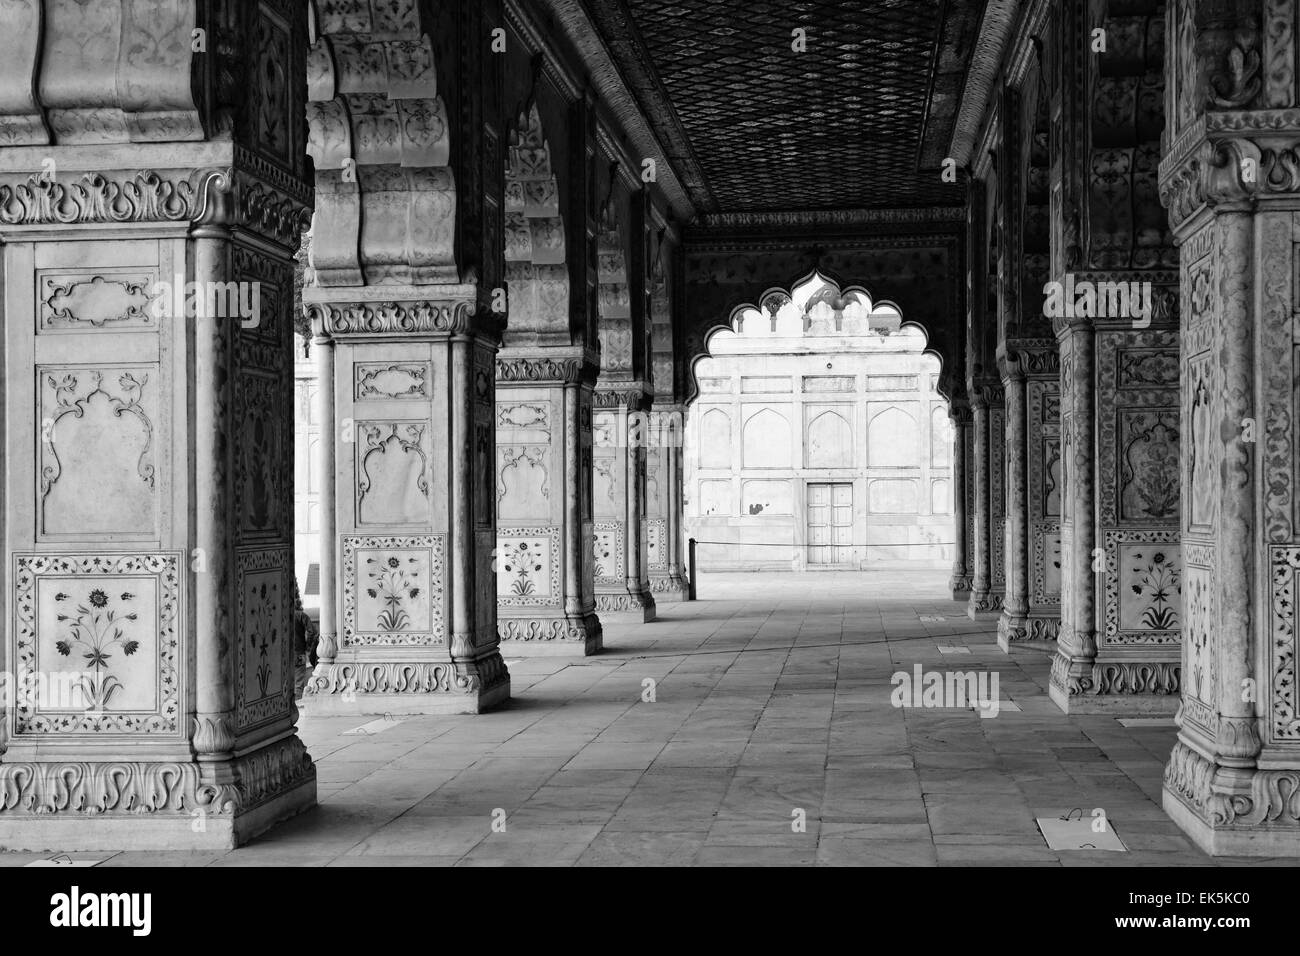 India, Delhi, the Red Fort, Diwan-I-Am, on the banks of the river Yamuna,  the fort was built by Shahjahan as the Delhi citadel Stock Photo